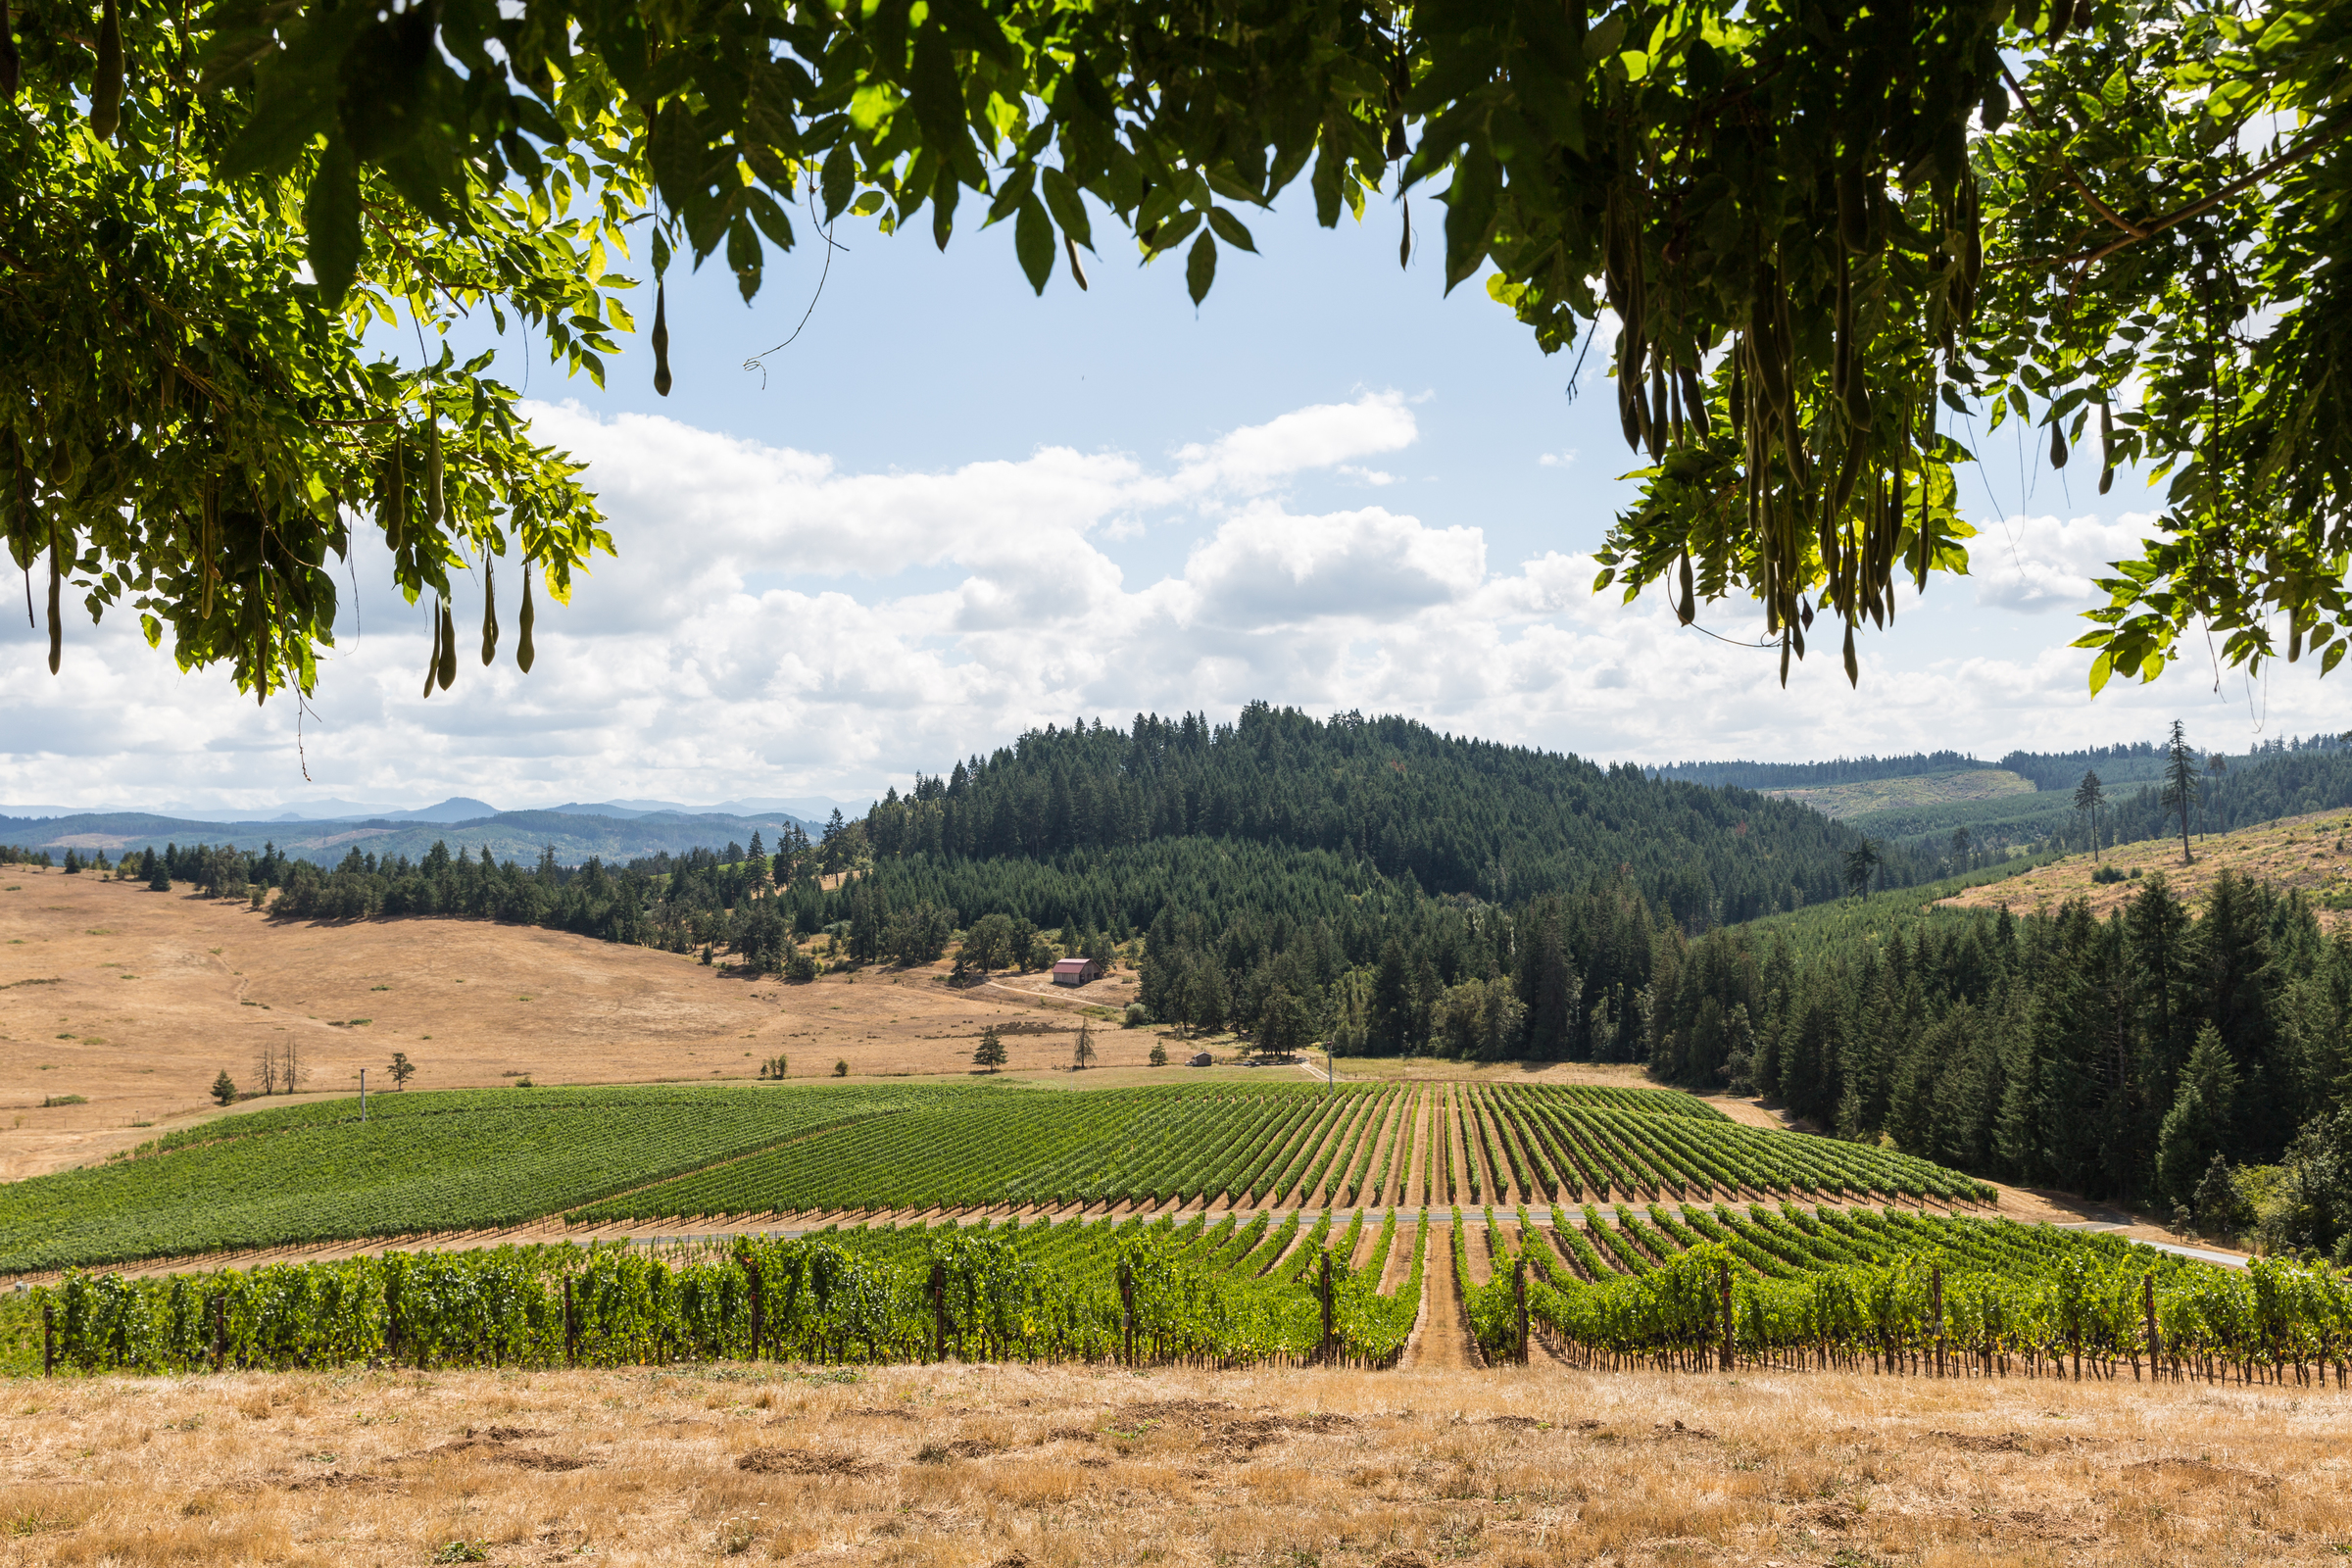 Visit: South & Central Willamette Valley